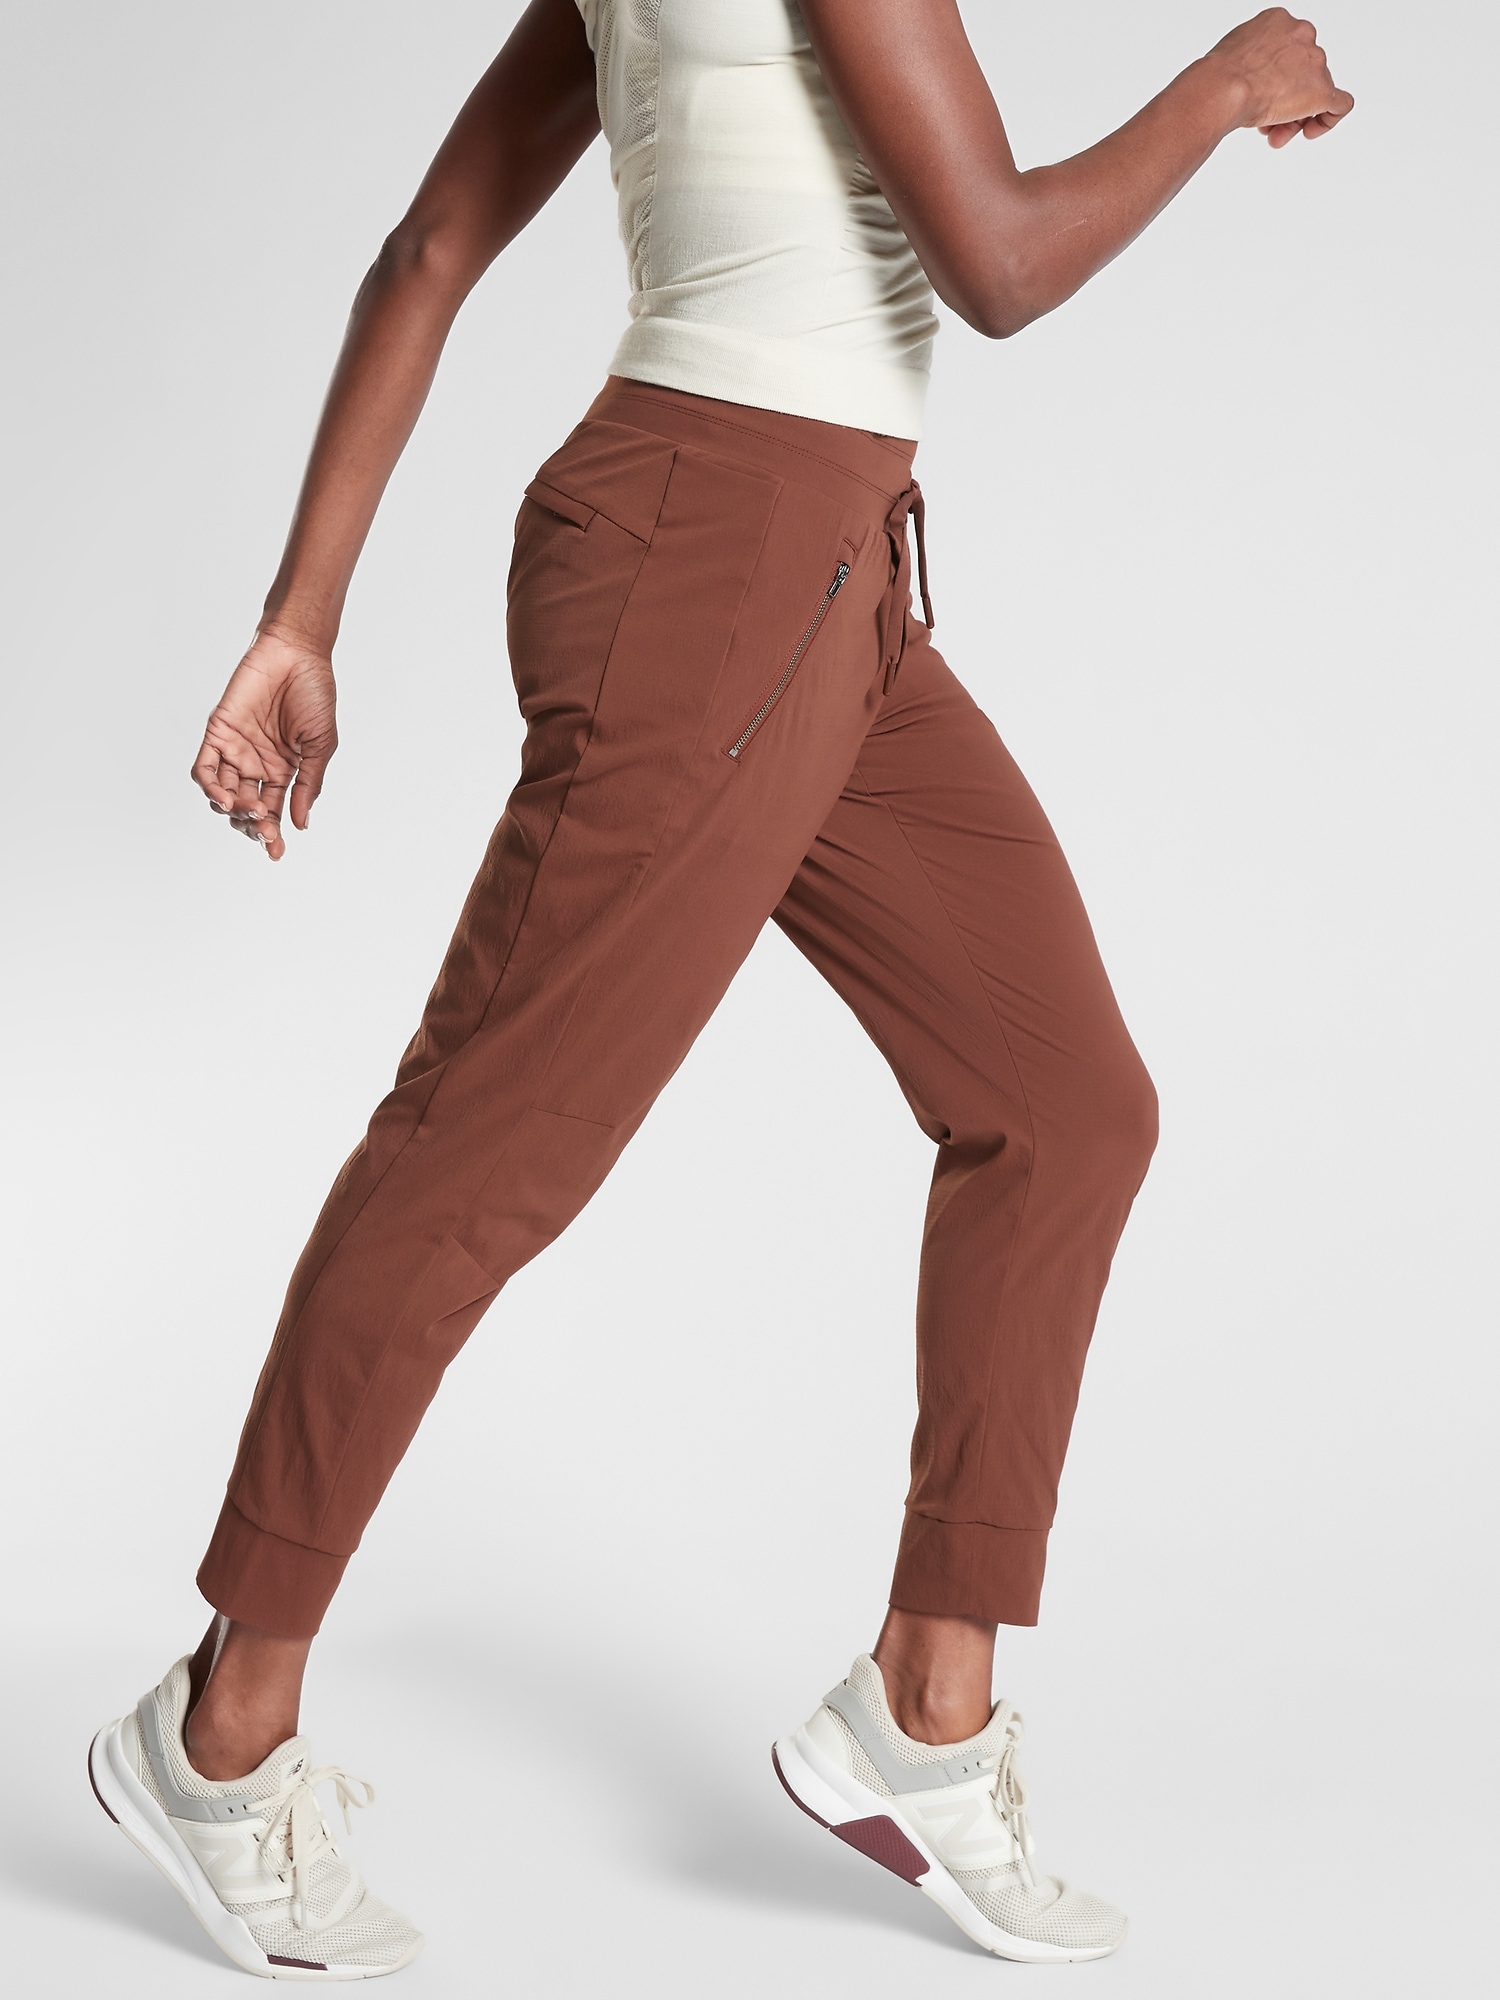 Athleta - Adventure awaits, prepare accordingly ⛰ Reintroducing the Trekkie  North Jogger, now with a buttery-soft Powervita waistband for made-to-move  stretch. Shop Trekkie:  #PowerOfShe